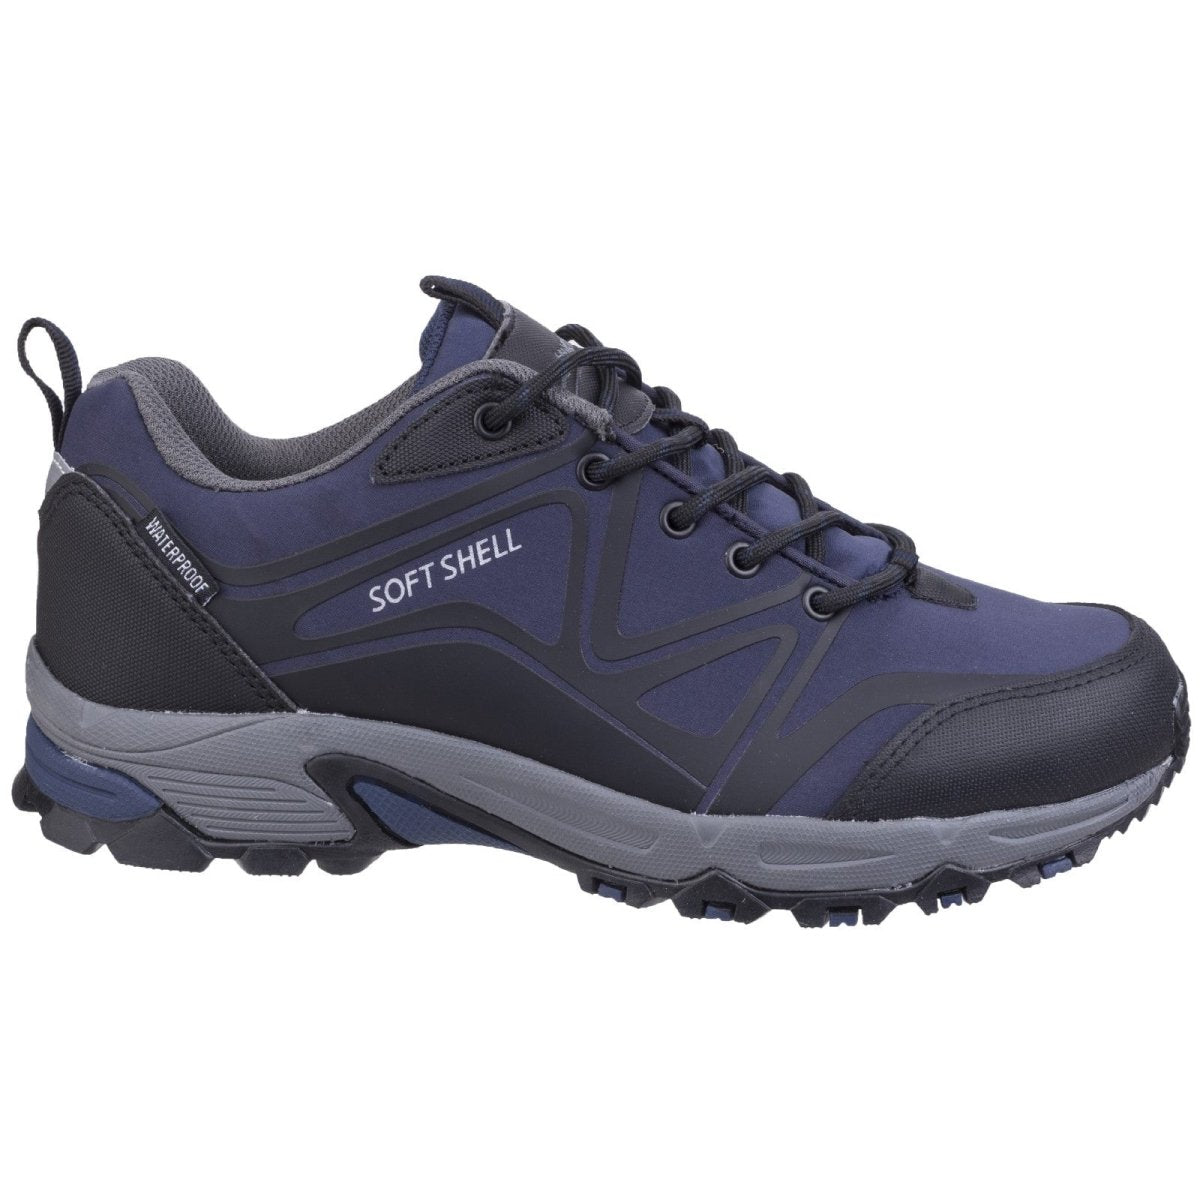 Cotswold Abbeydale Low Mens Walking Hiking Shoes - Shoe Store Direct